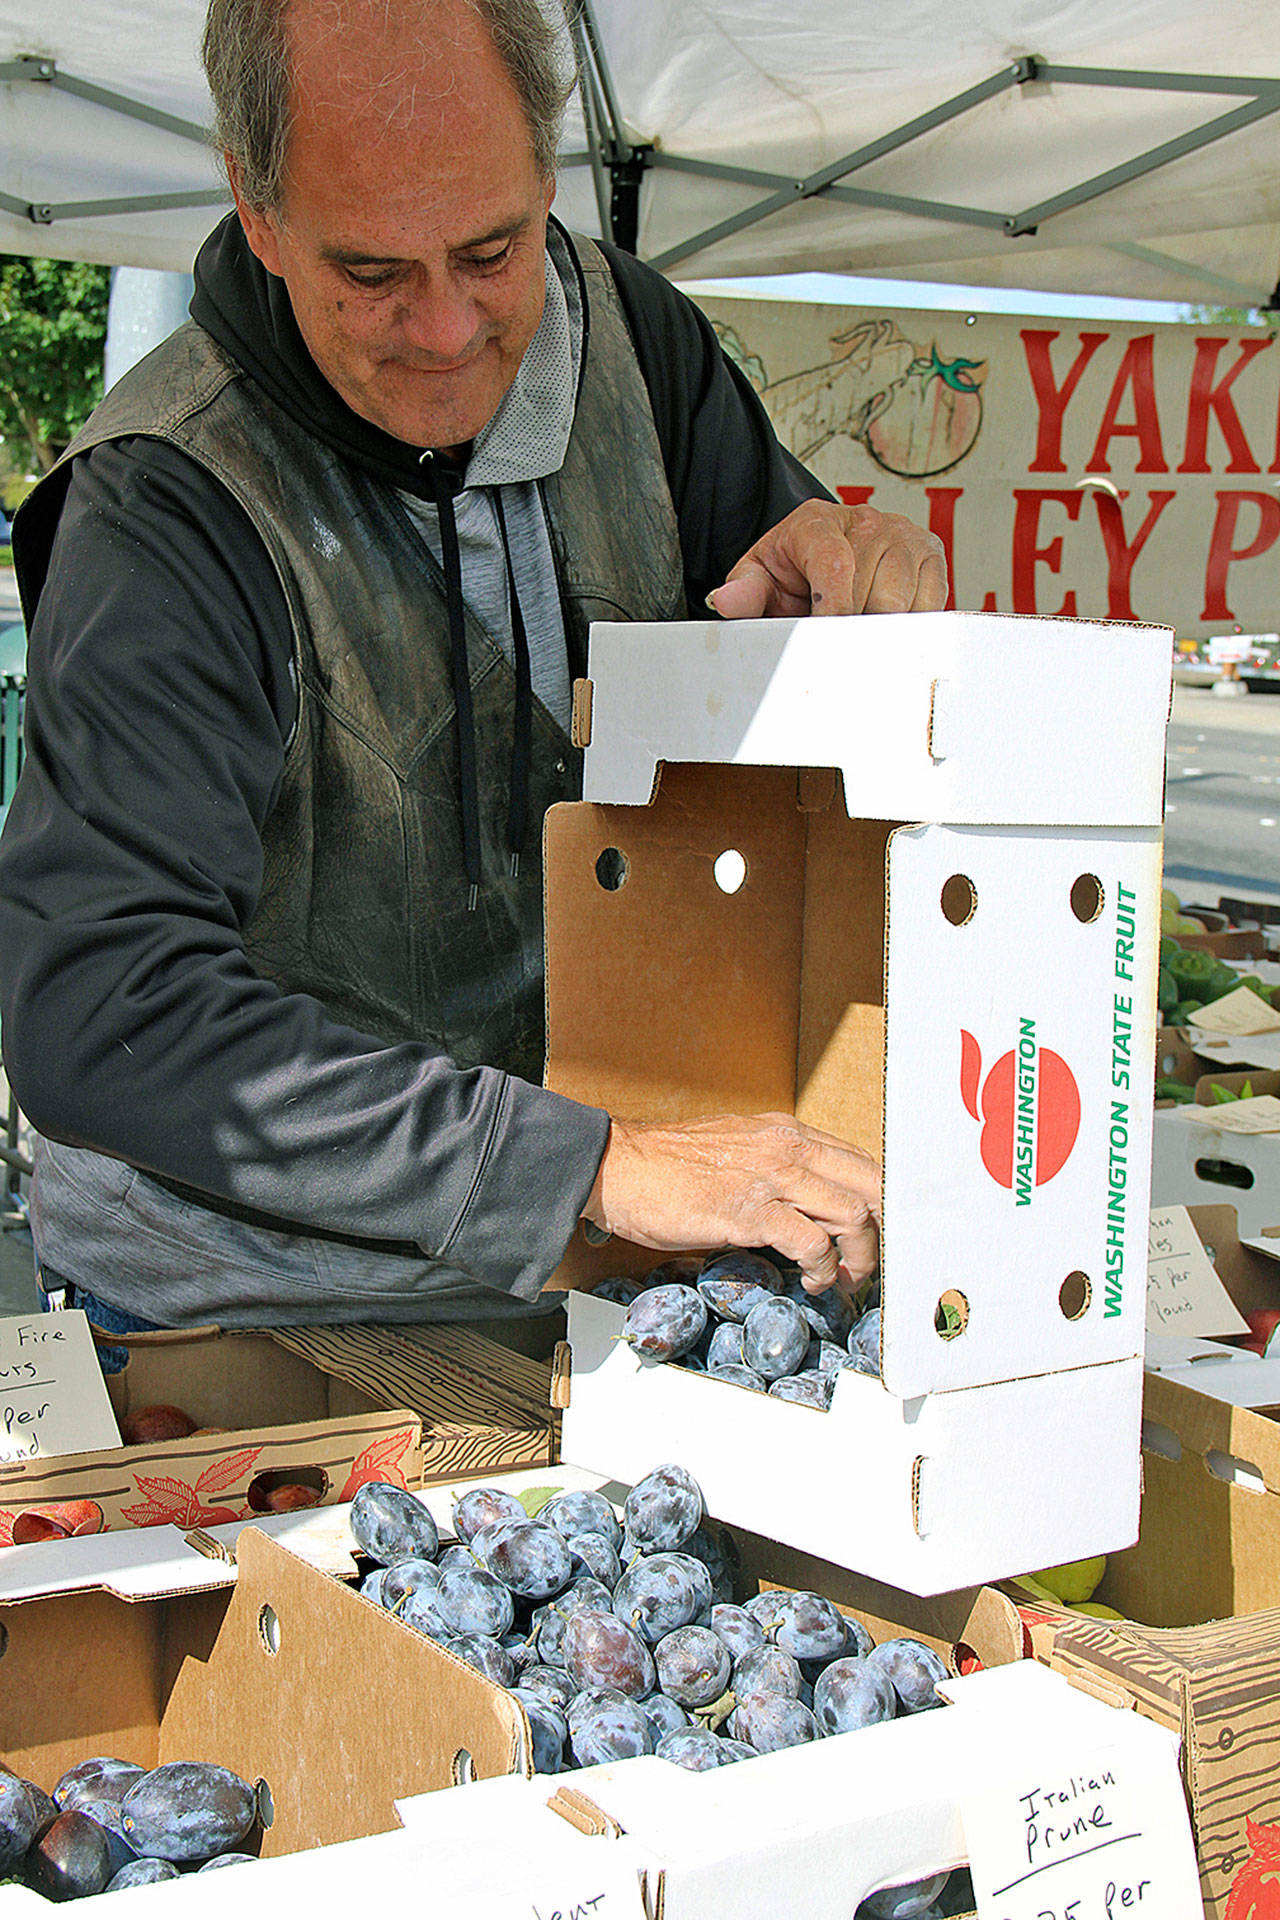 Mike “Ram” Indorf, who along with his wife Sue owns and operates Yakima Valley Produce, refills a box with Italian prunes during closing day in 2017 at the Kent Farmers Market at the Towns Square Plaza. The market has been a Kent Lions community service project since 1974. FILE PHOTO, Kent Reporter